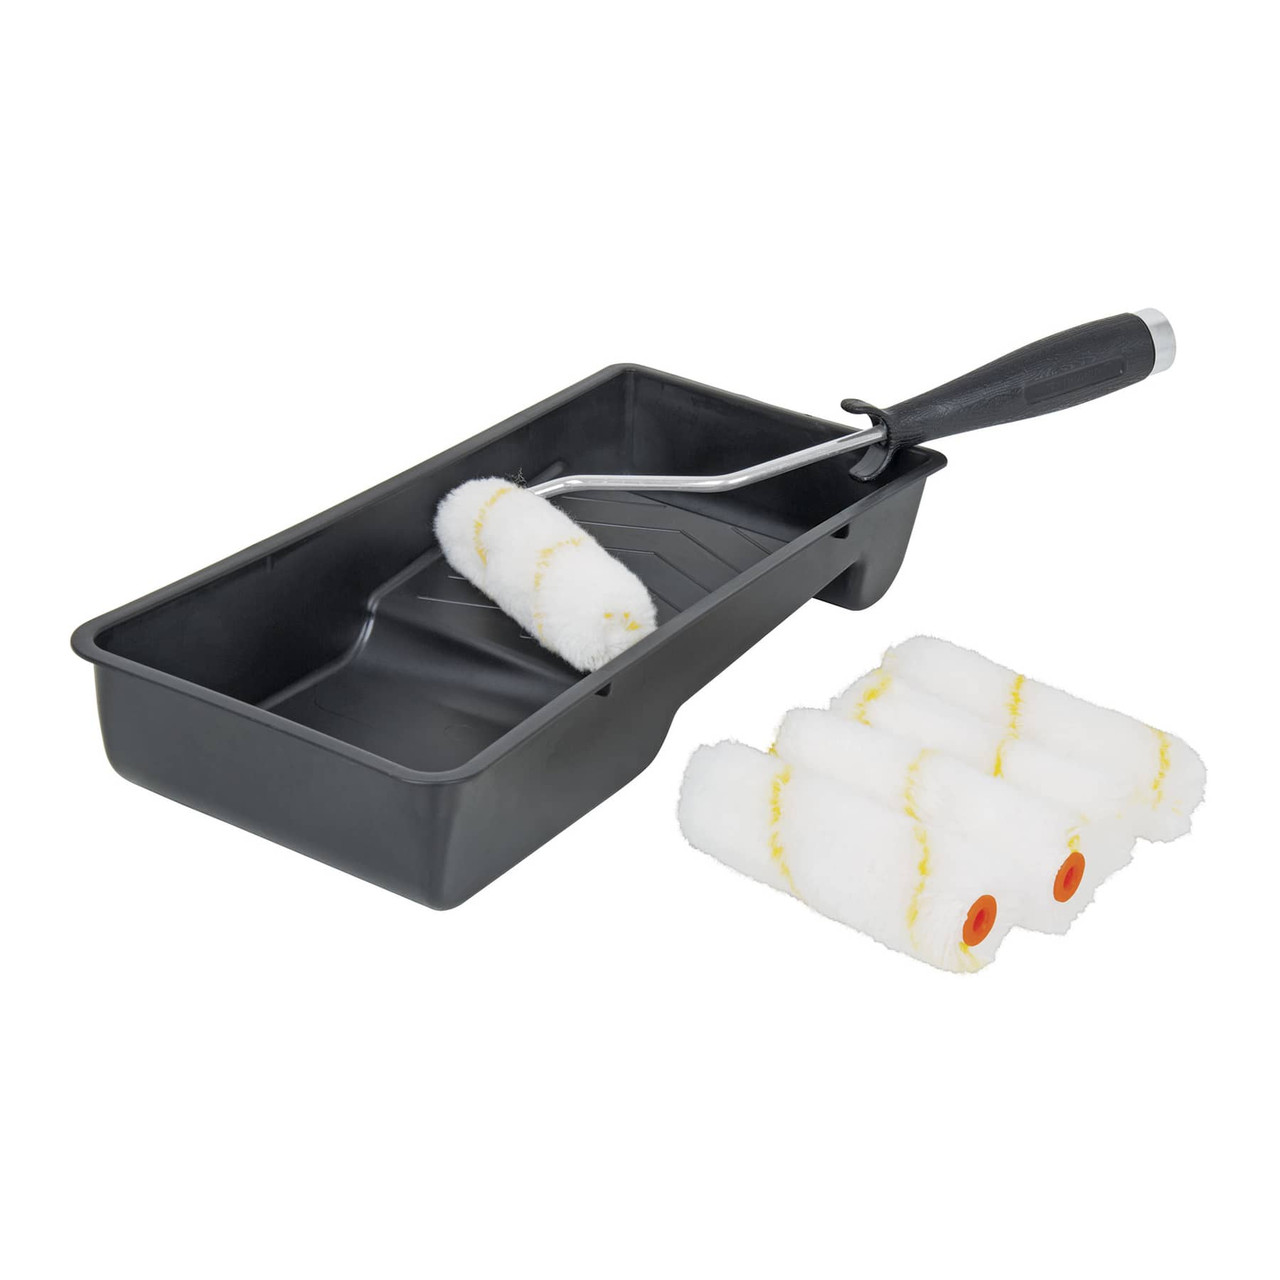 Truper 4" Roller Tray Set 3 Pieces #15023-2 Pack